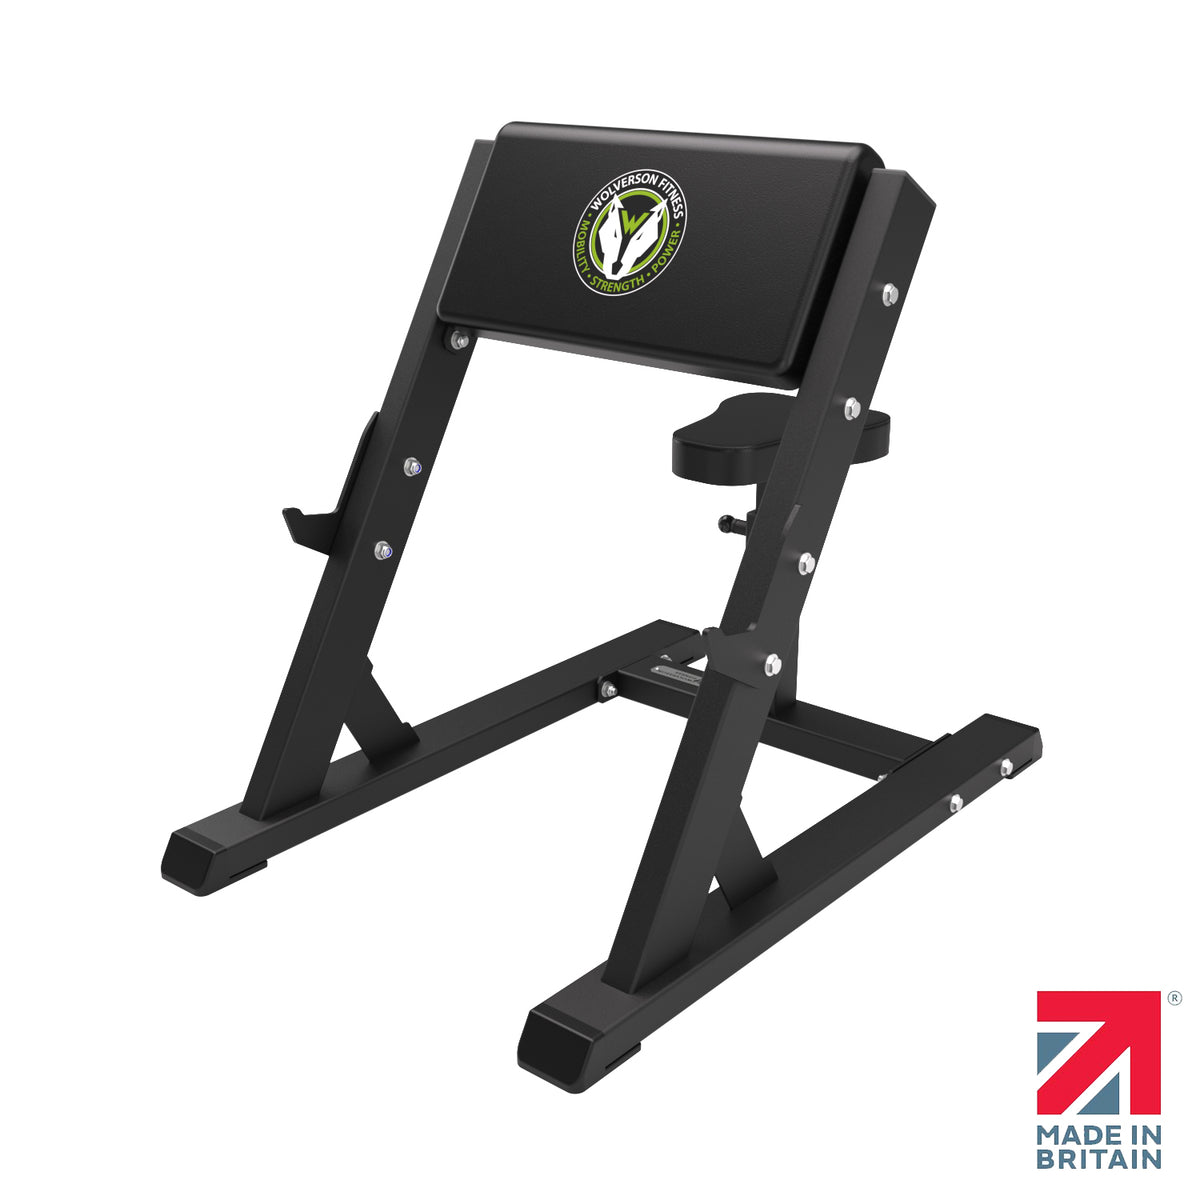 The Colossus Series Plate Loaded Seated Row